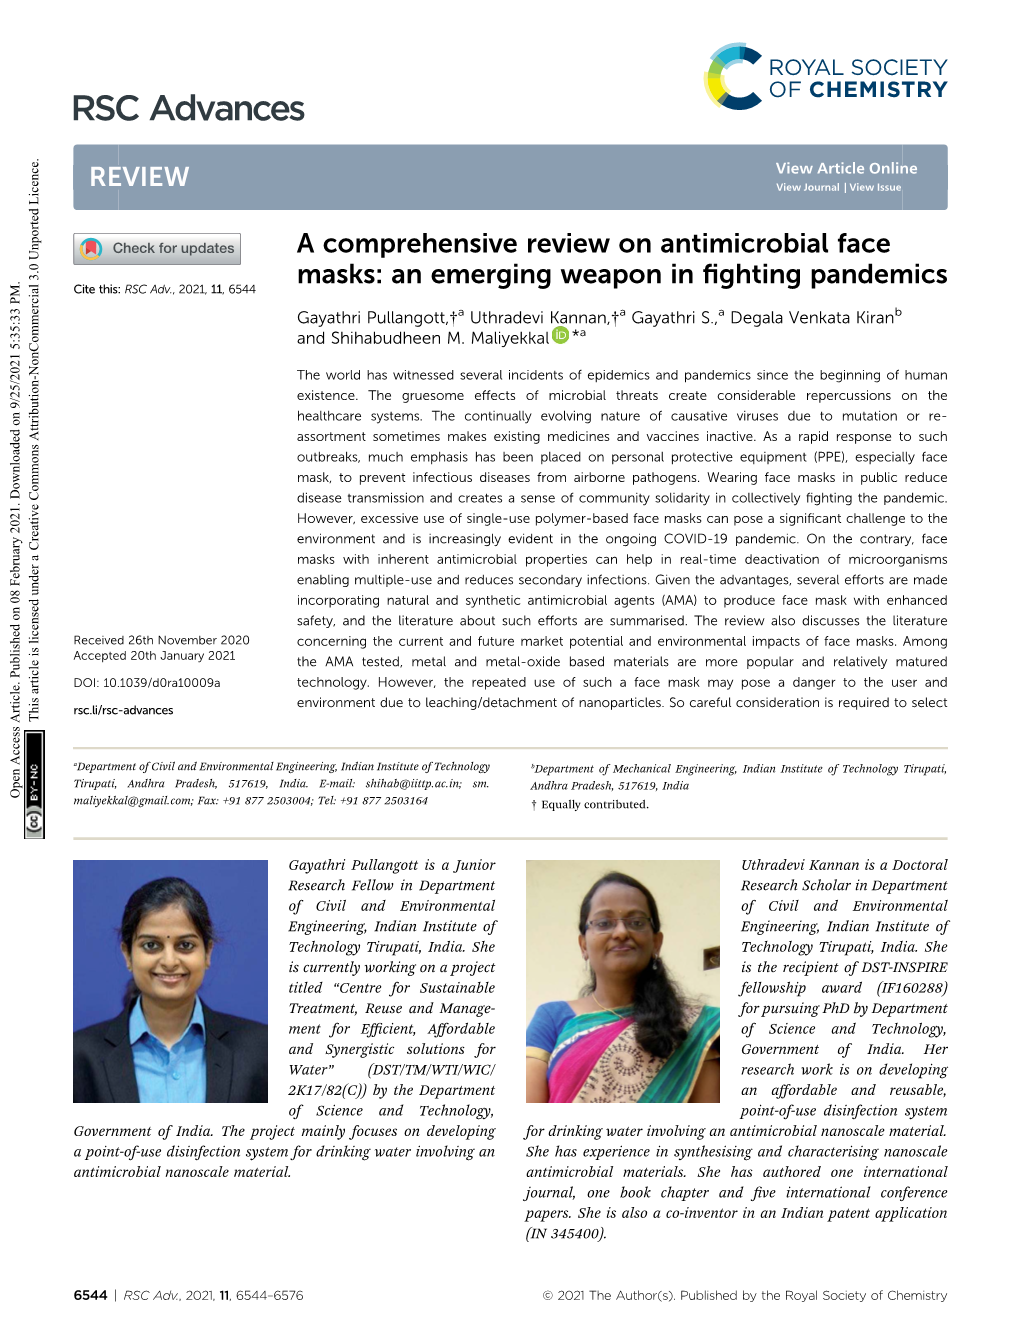 A Comprehensive Review on Antimicrobial Face